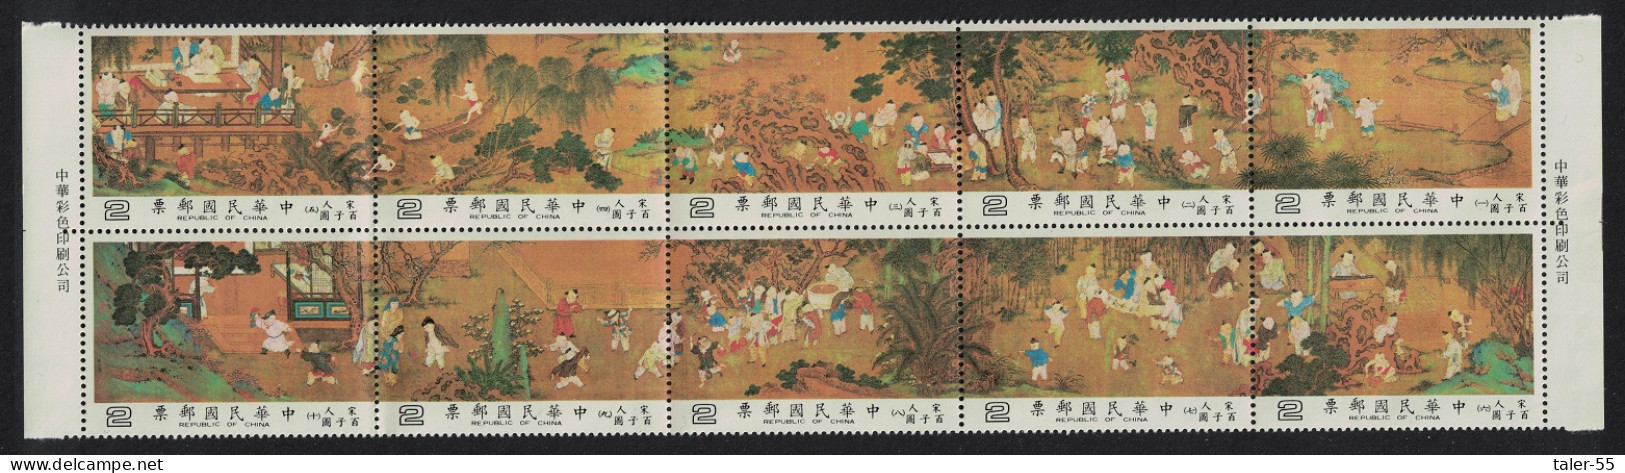 Taiwan Sung Dynasty Painting 'One Hundred Young Boys' 10v T2 1981 MNH SG#1403-1412 - Unused Stamps